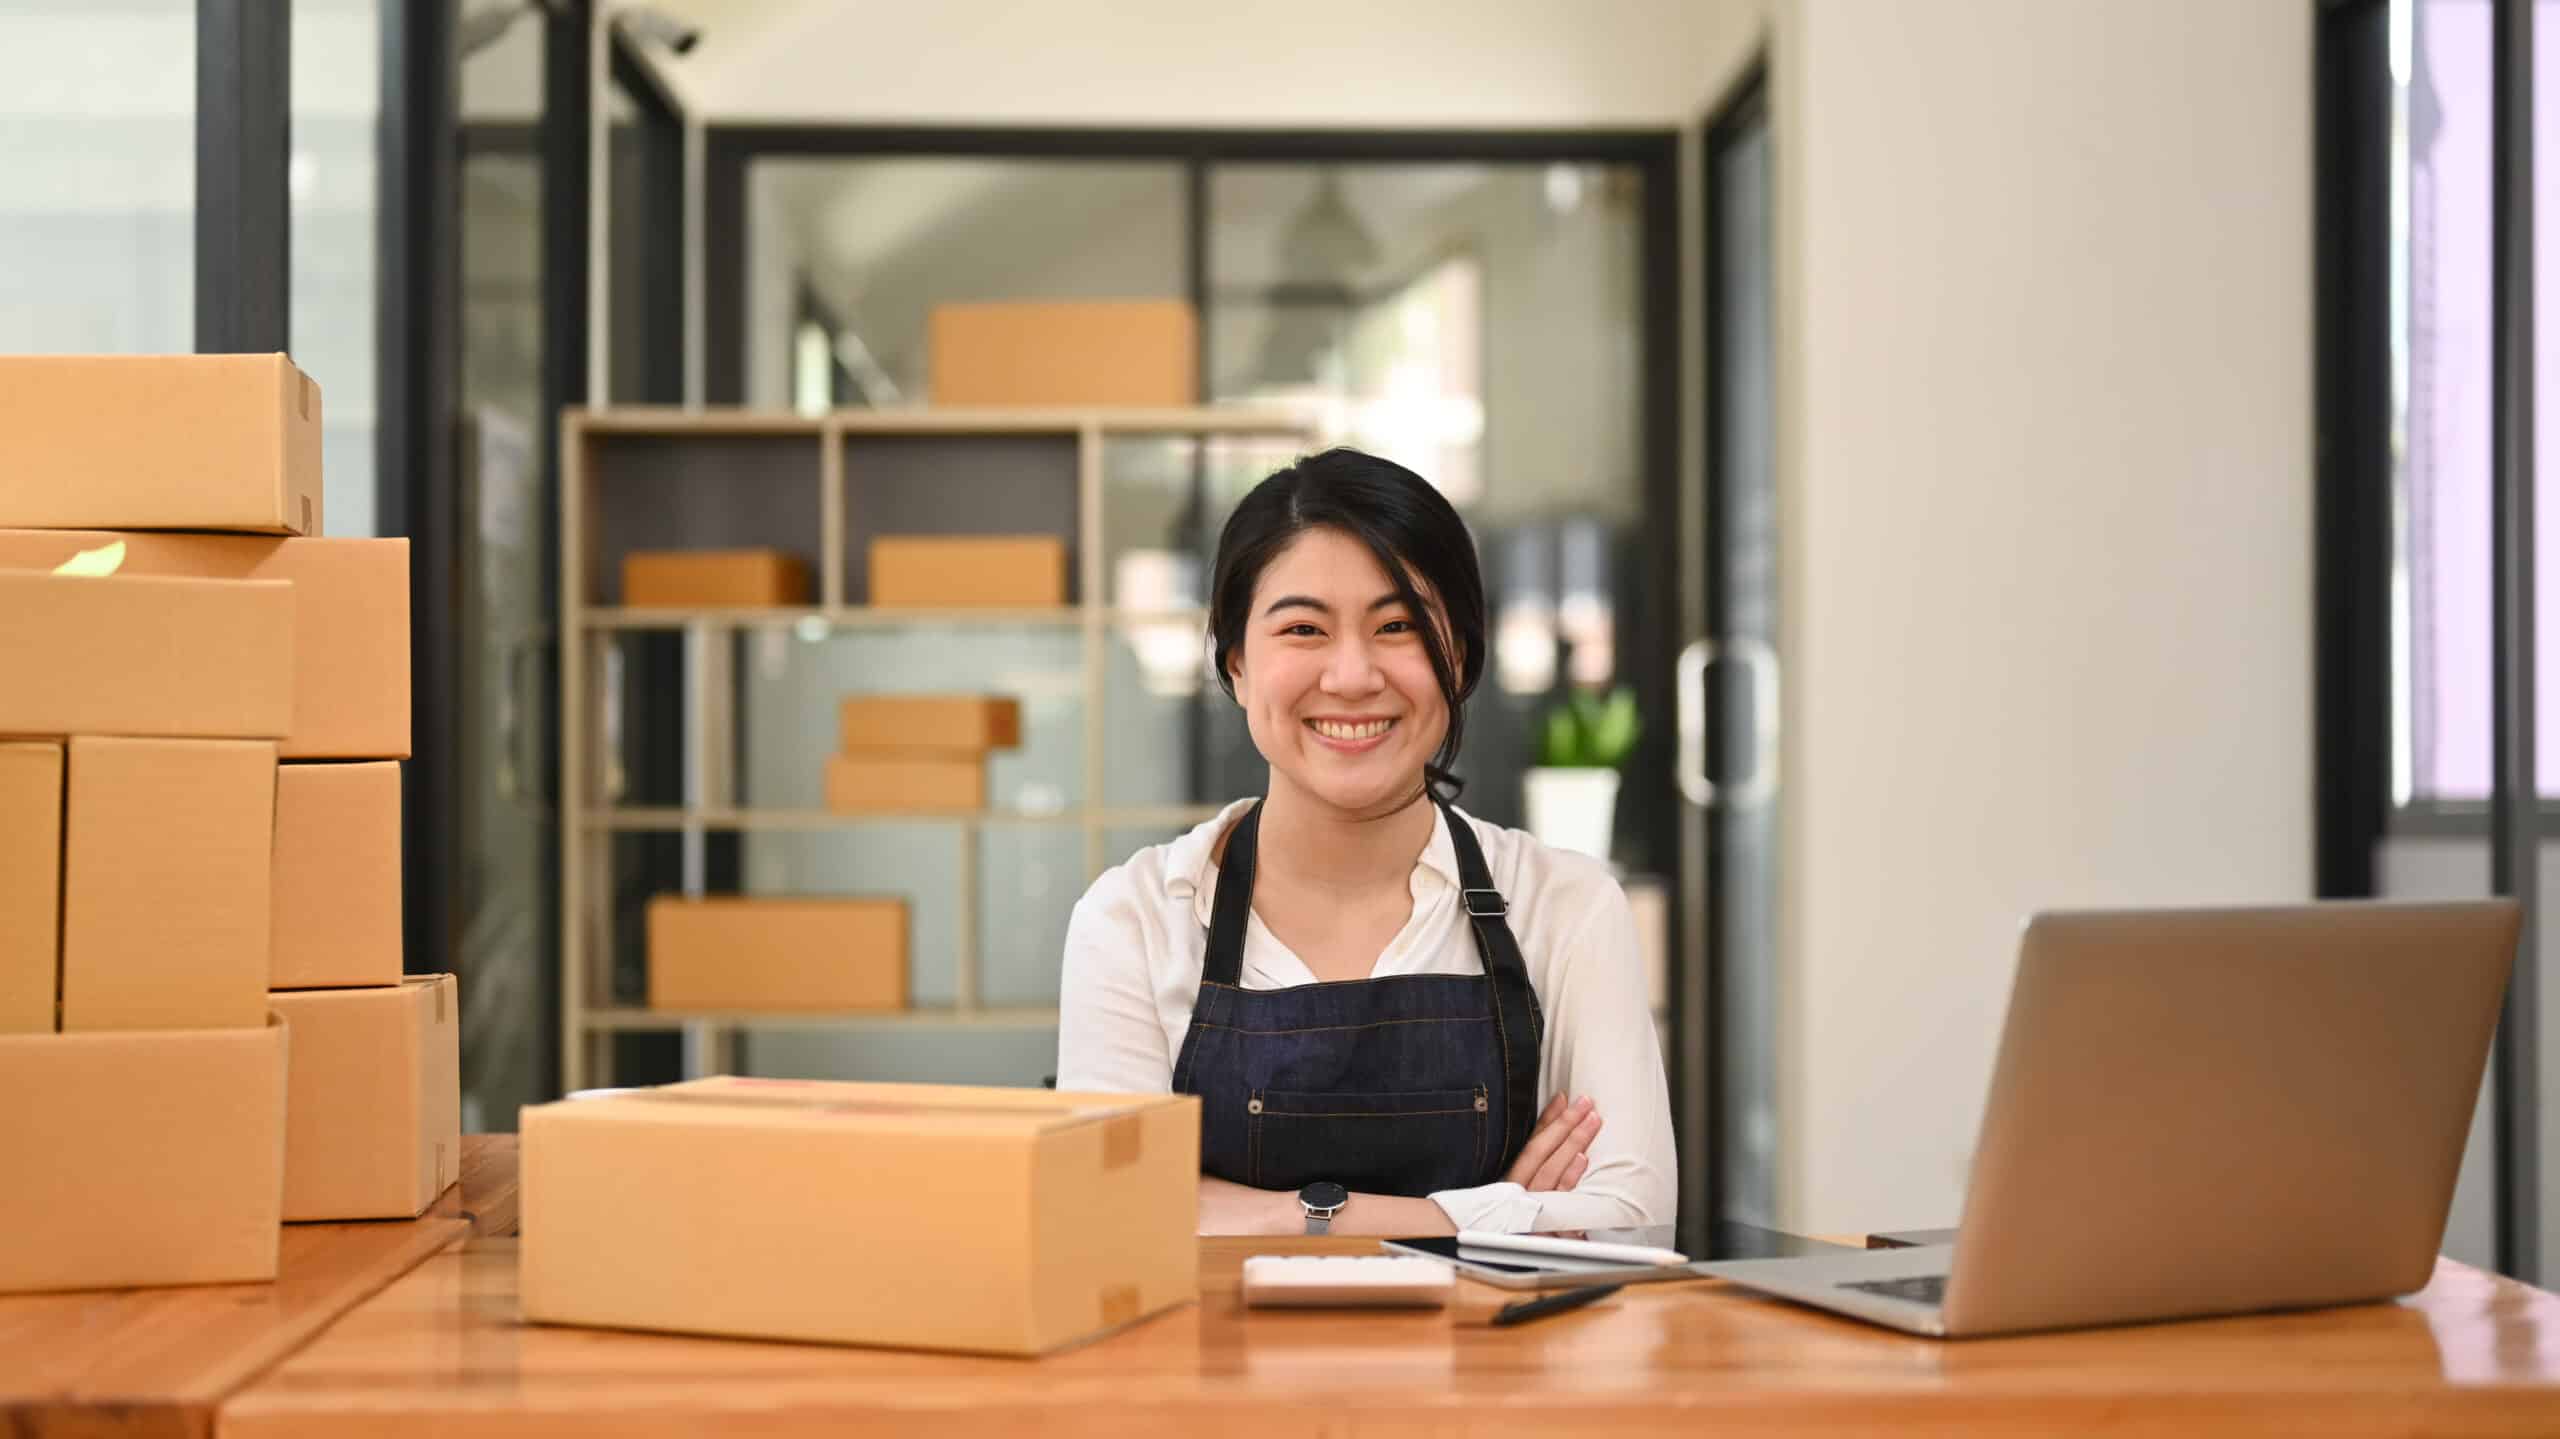 Confident young female small business entrepreneur sitting with arms crossed and smiling at camera.